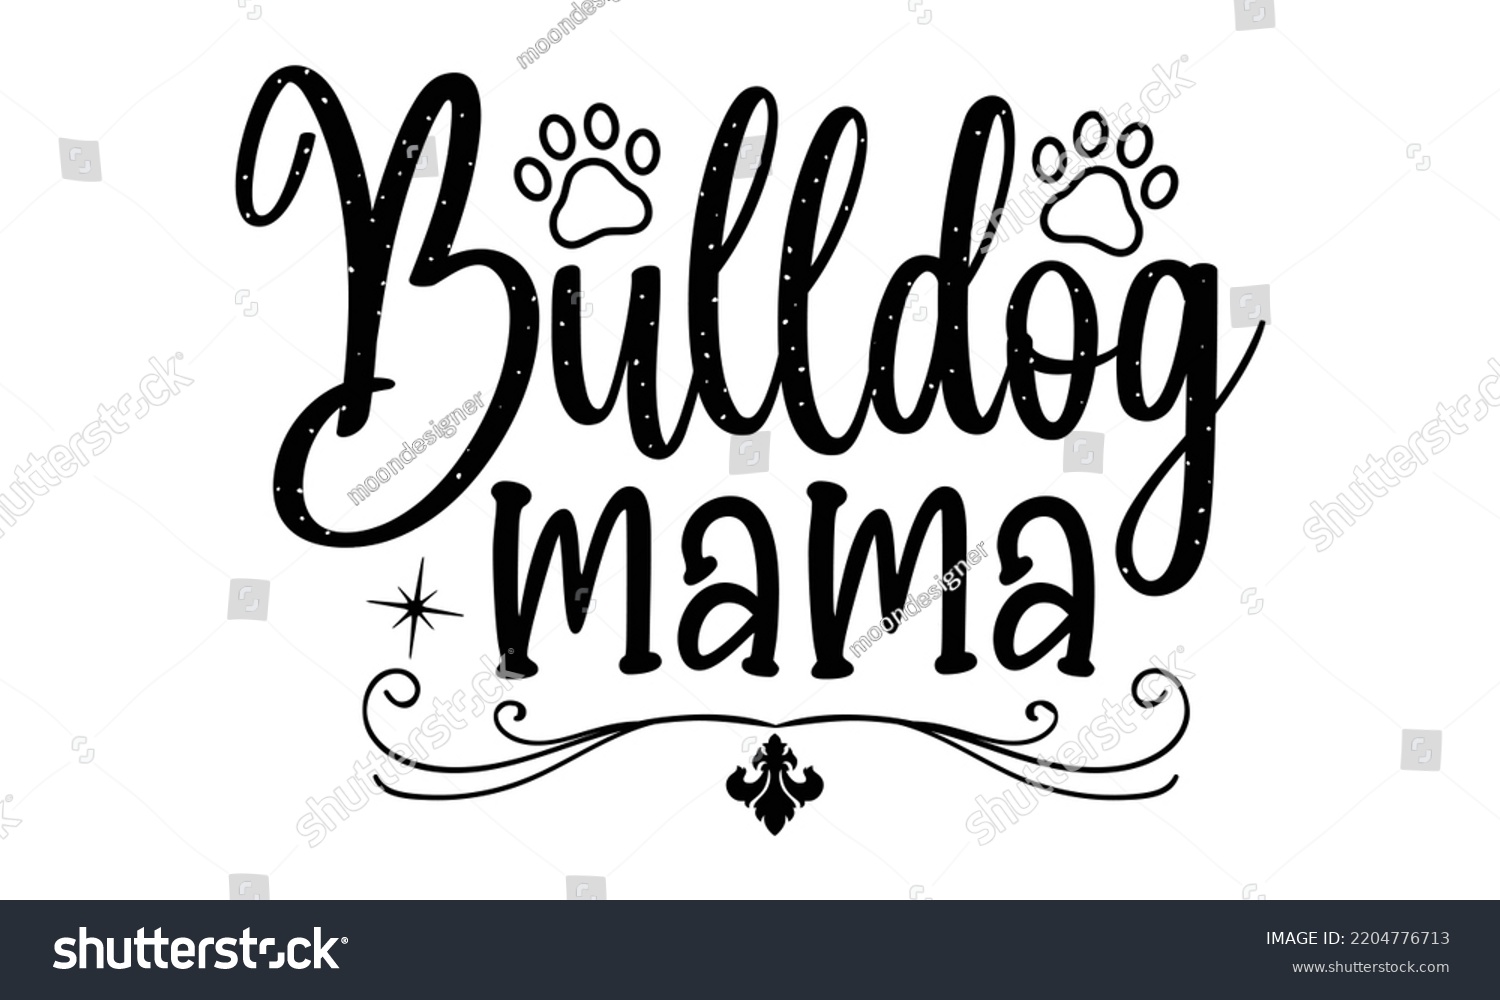 SVG of Bulldog mama - Bullodog T-shirt and SVG Design,  Dog lover t shirt design gift for women, typography design, can you download this Design, svg Files for Cutting and Silhouette EPS, 10 svg